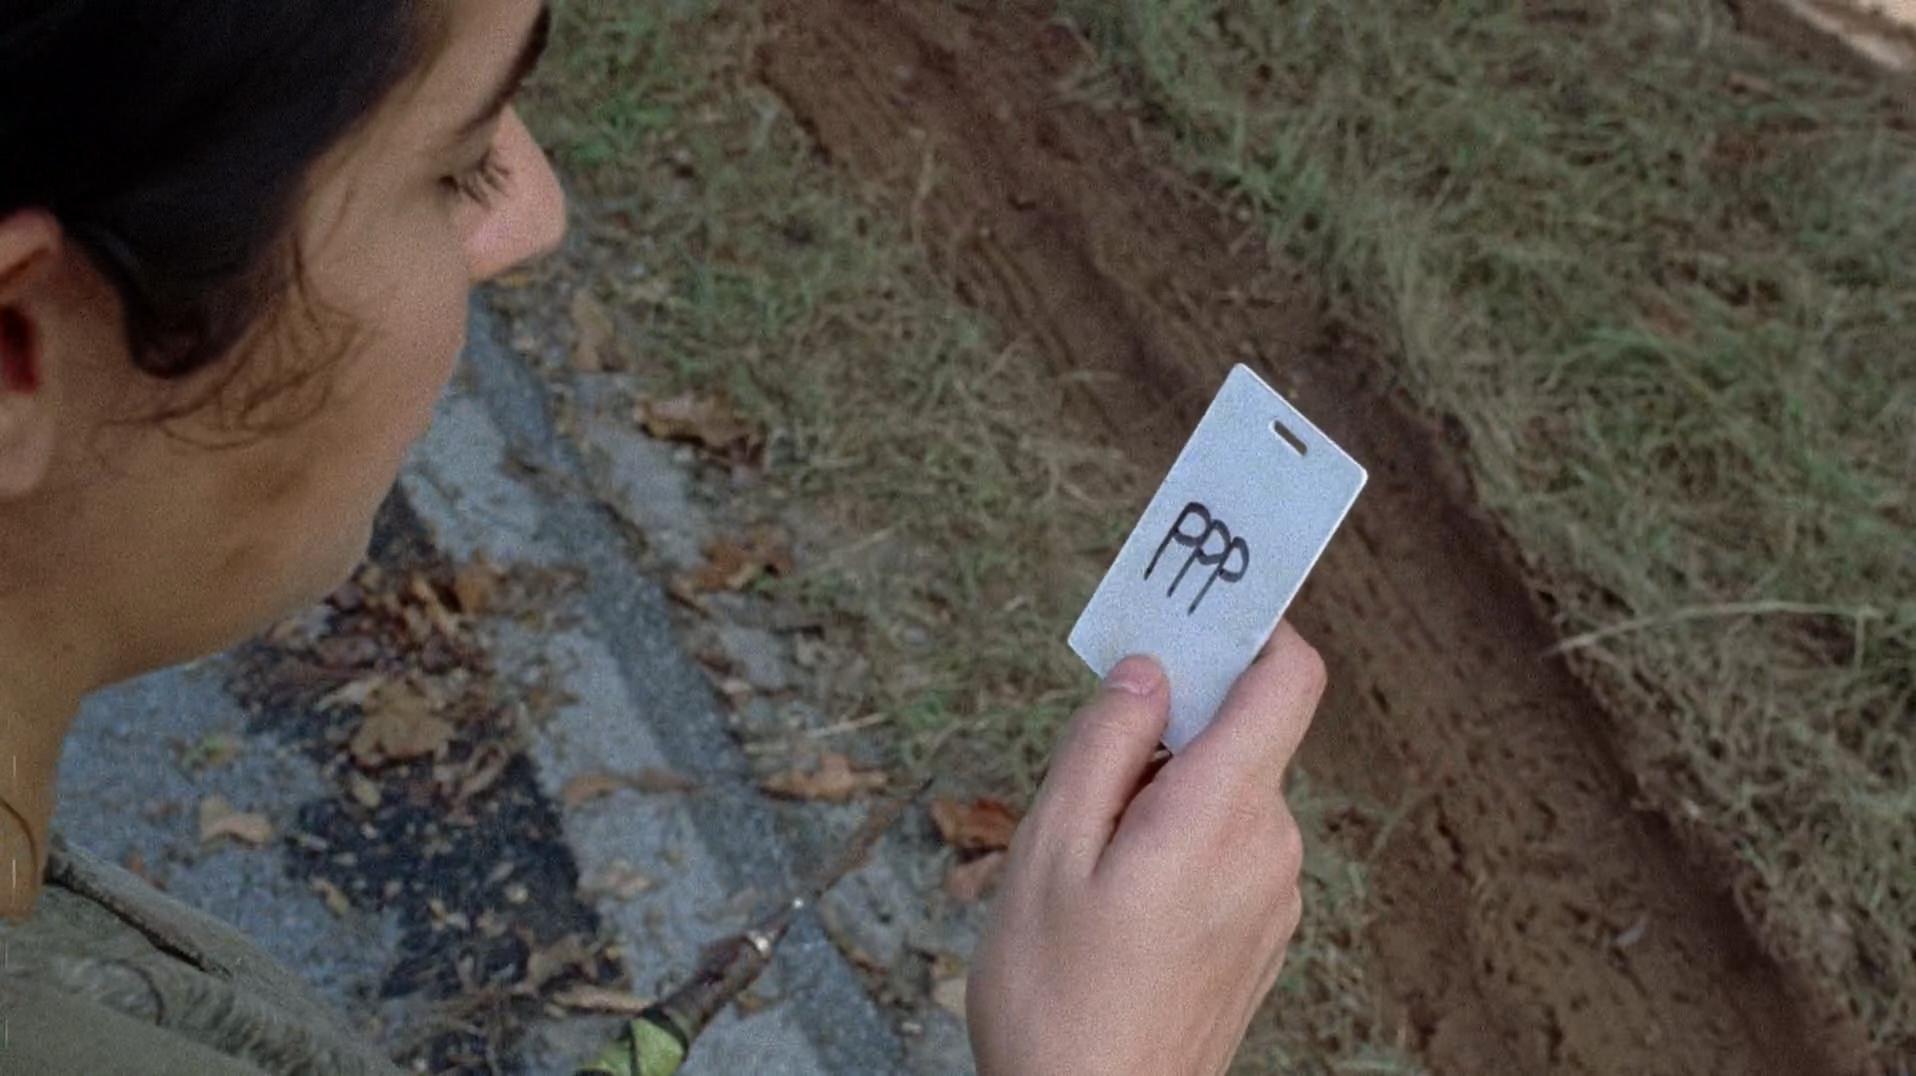 Tara with PPP key card on The Walking Dead